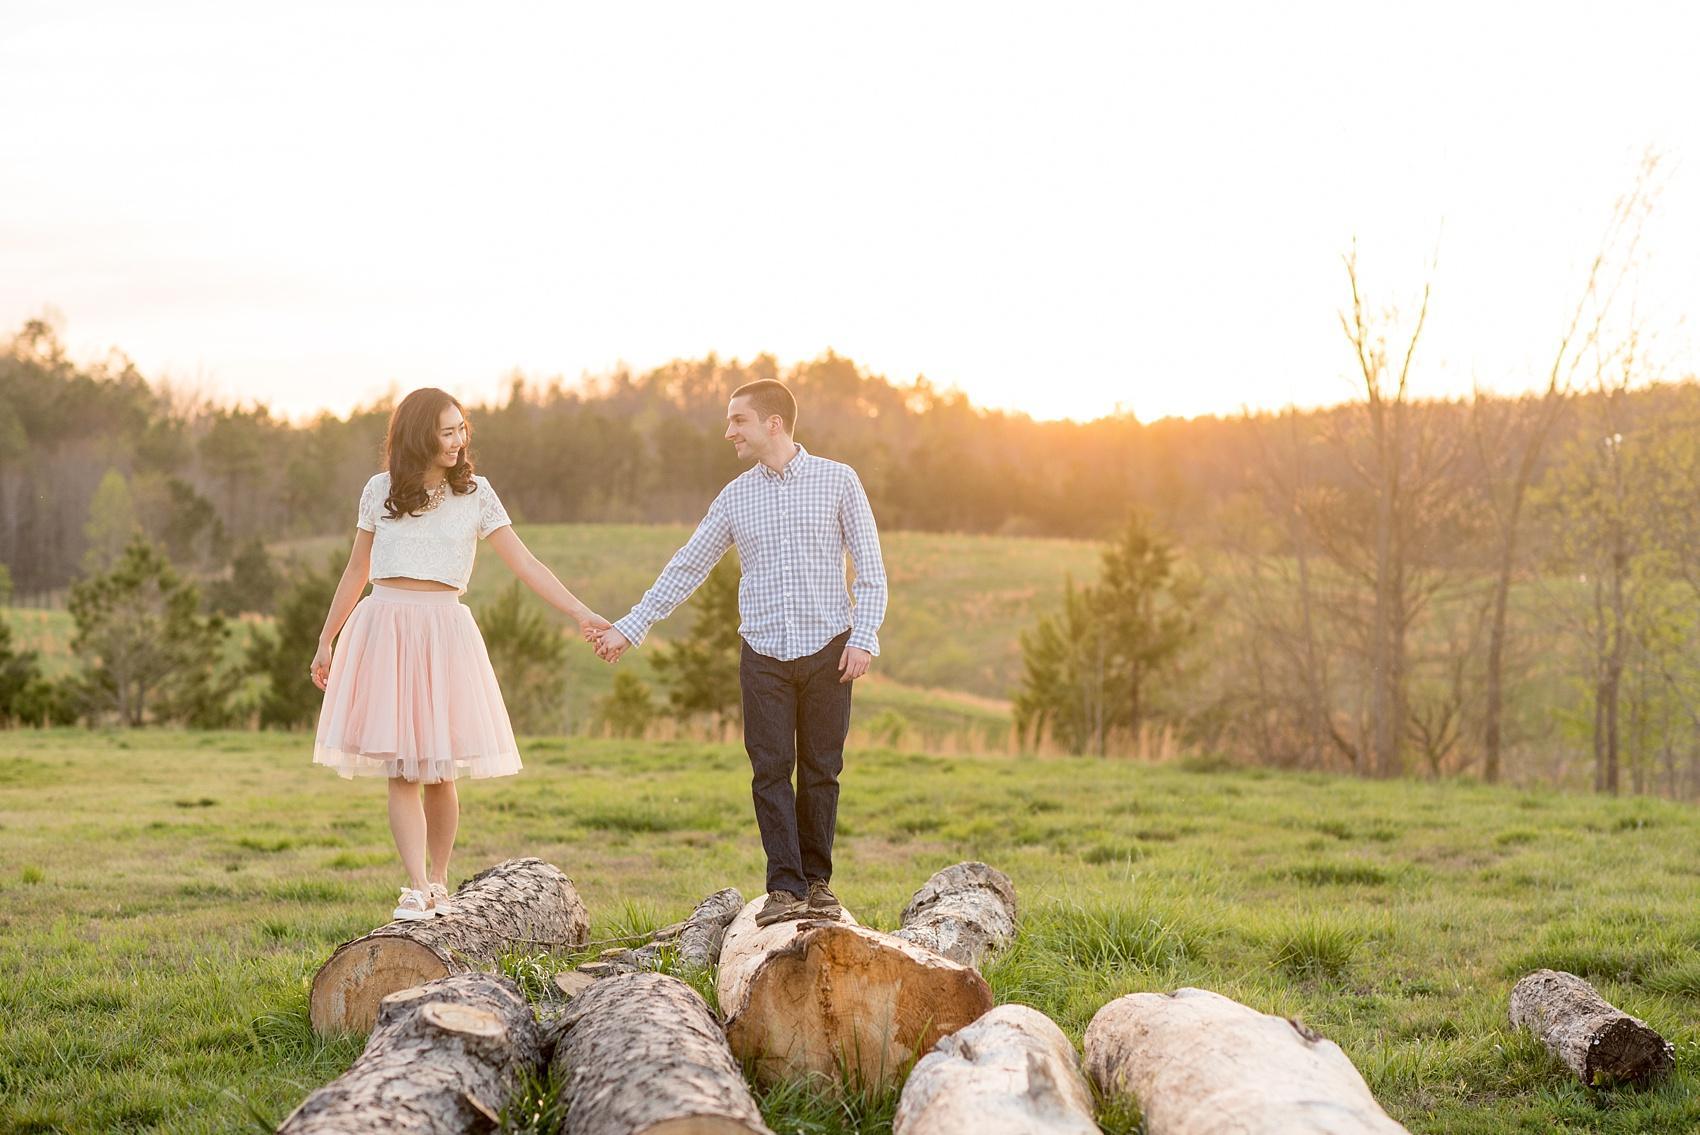 Raleigh farm engagement photos during the golden hour. Images by Mikkel Paige Photography.